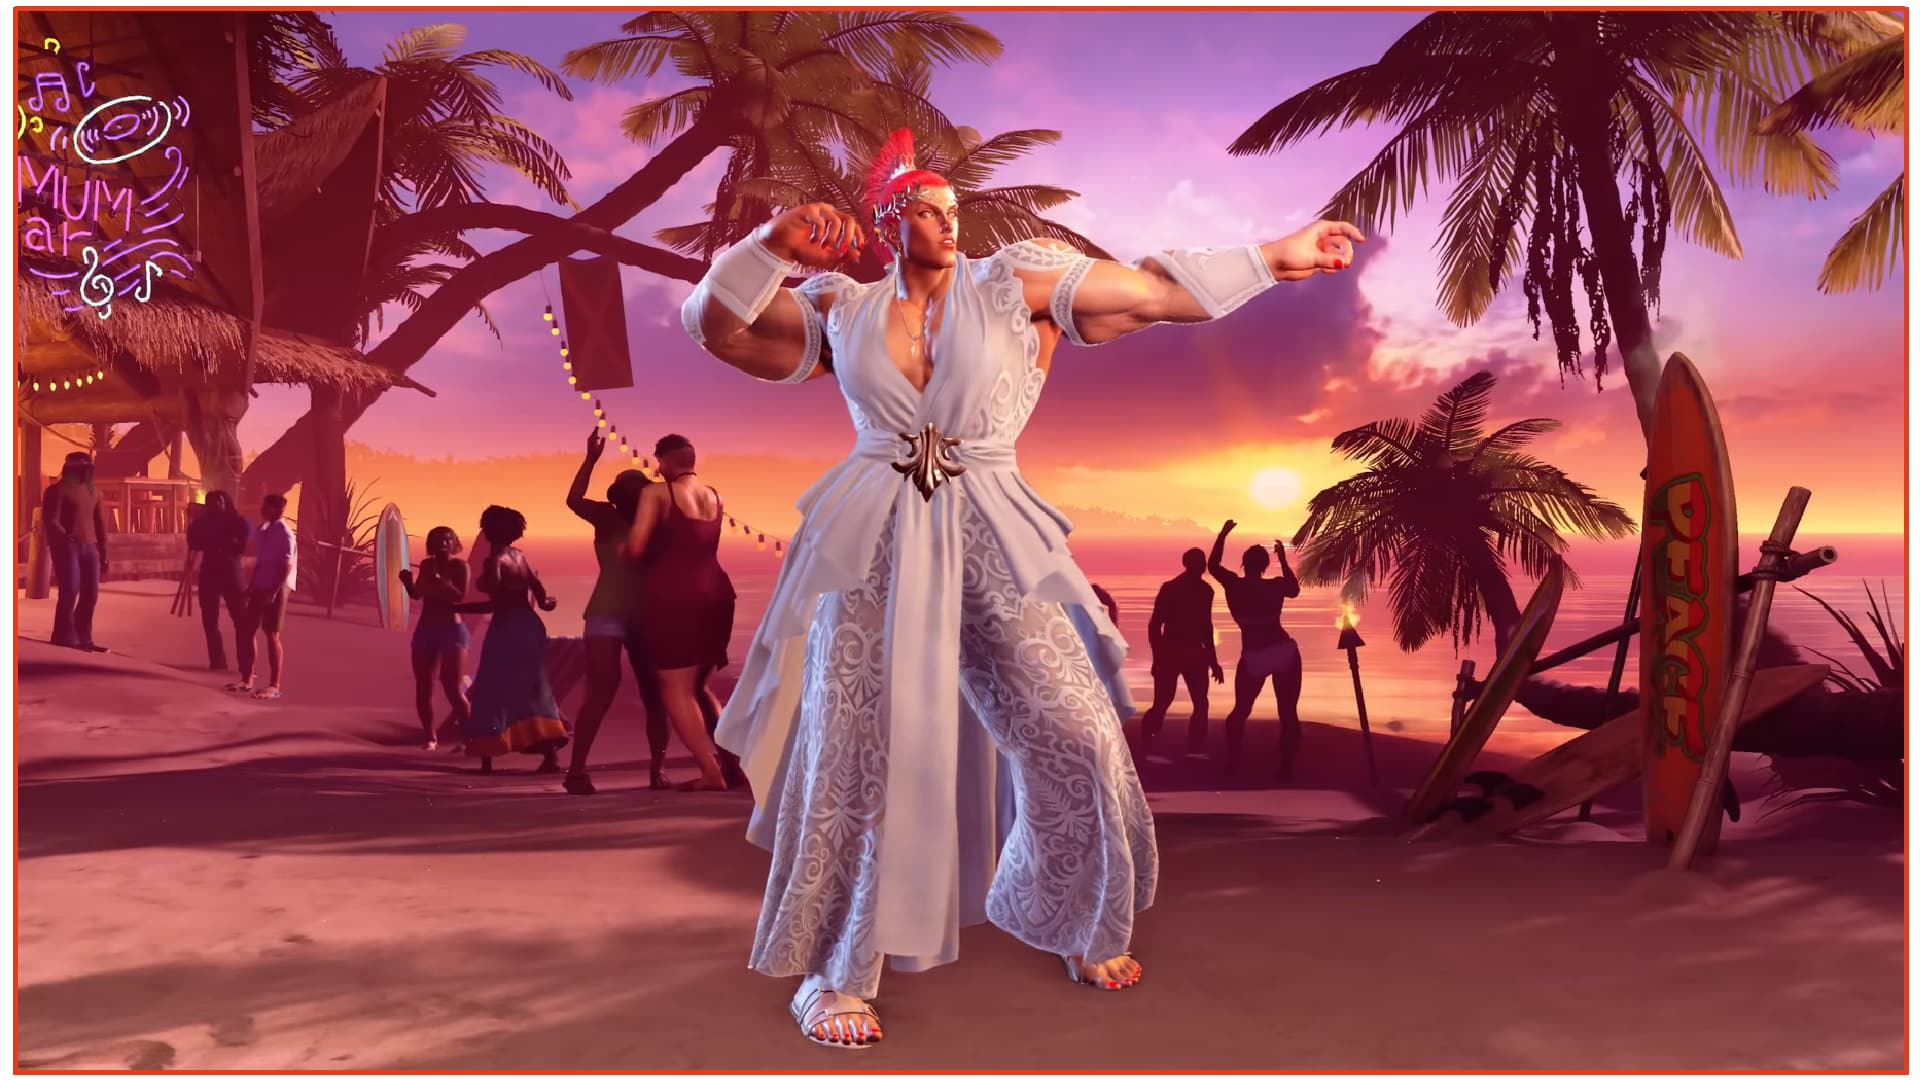 Street Fighter 6 review, Triumphant